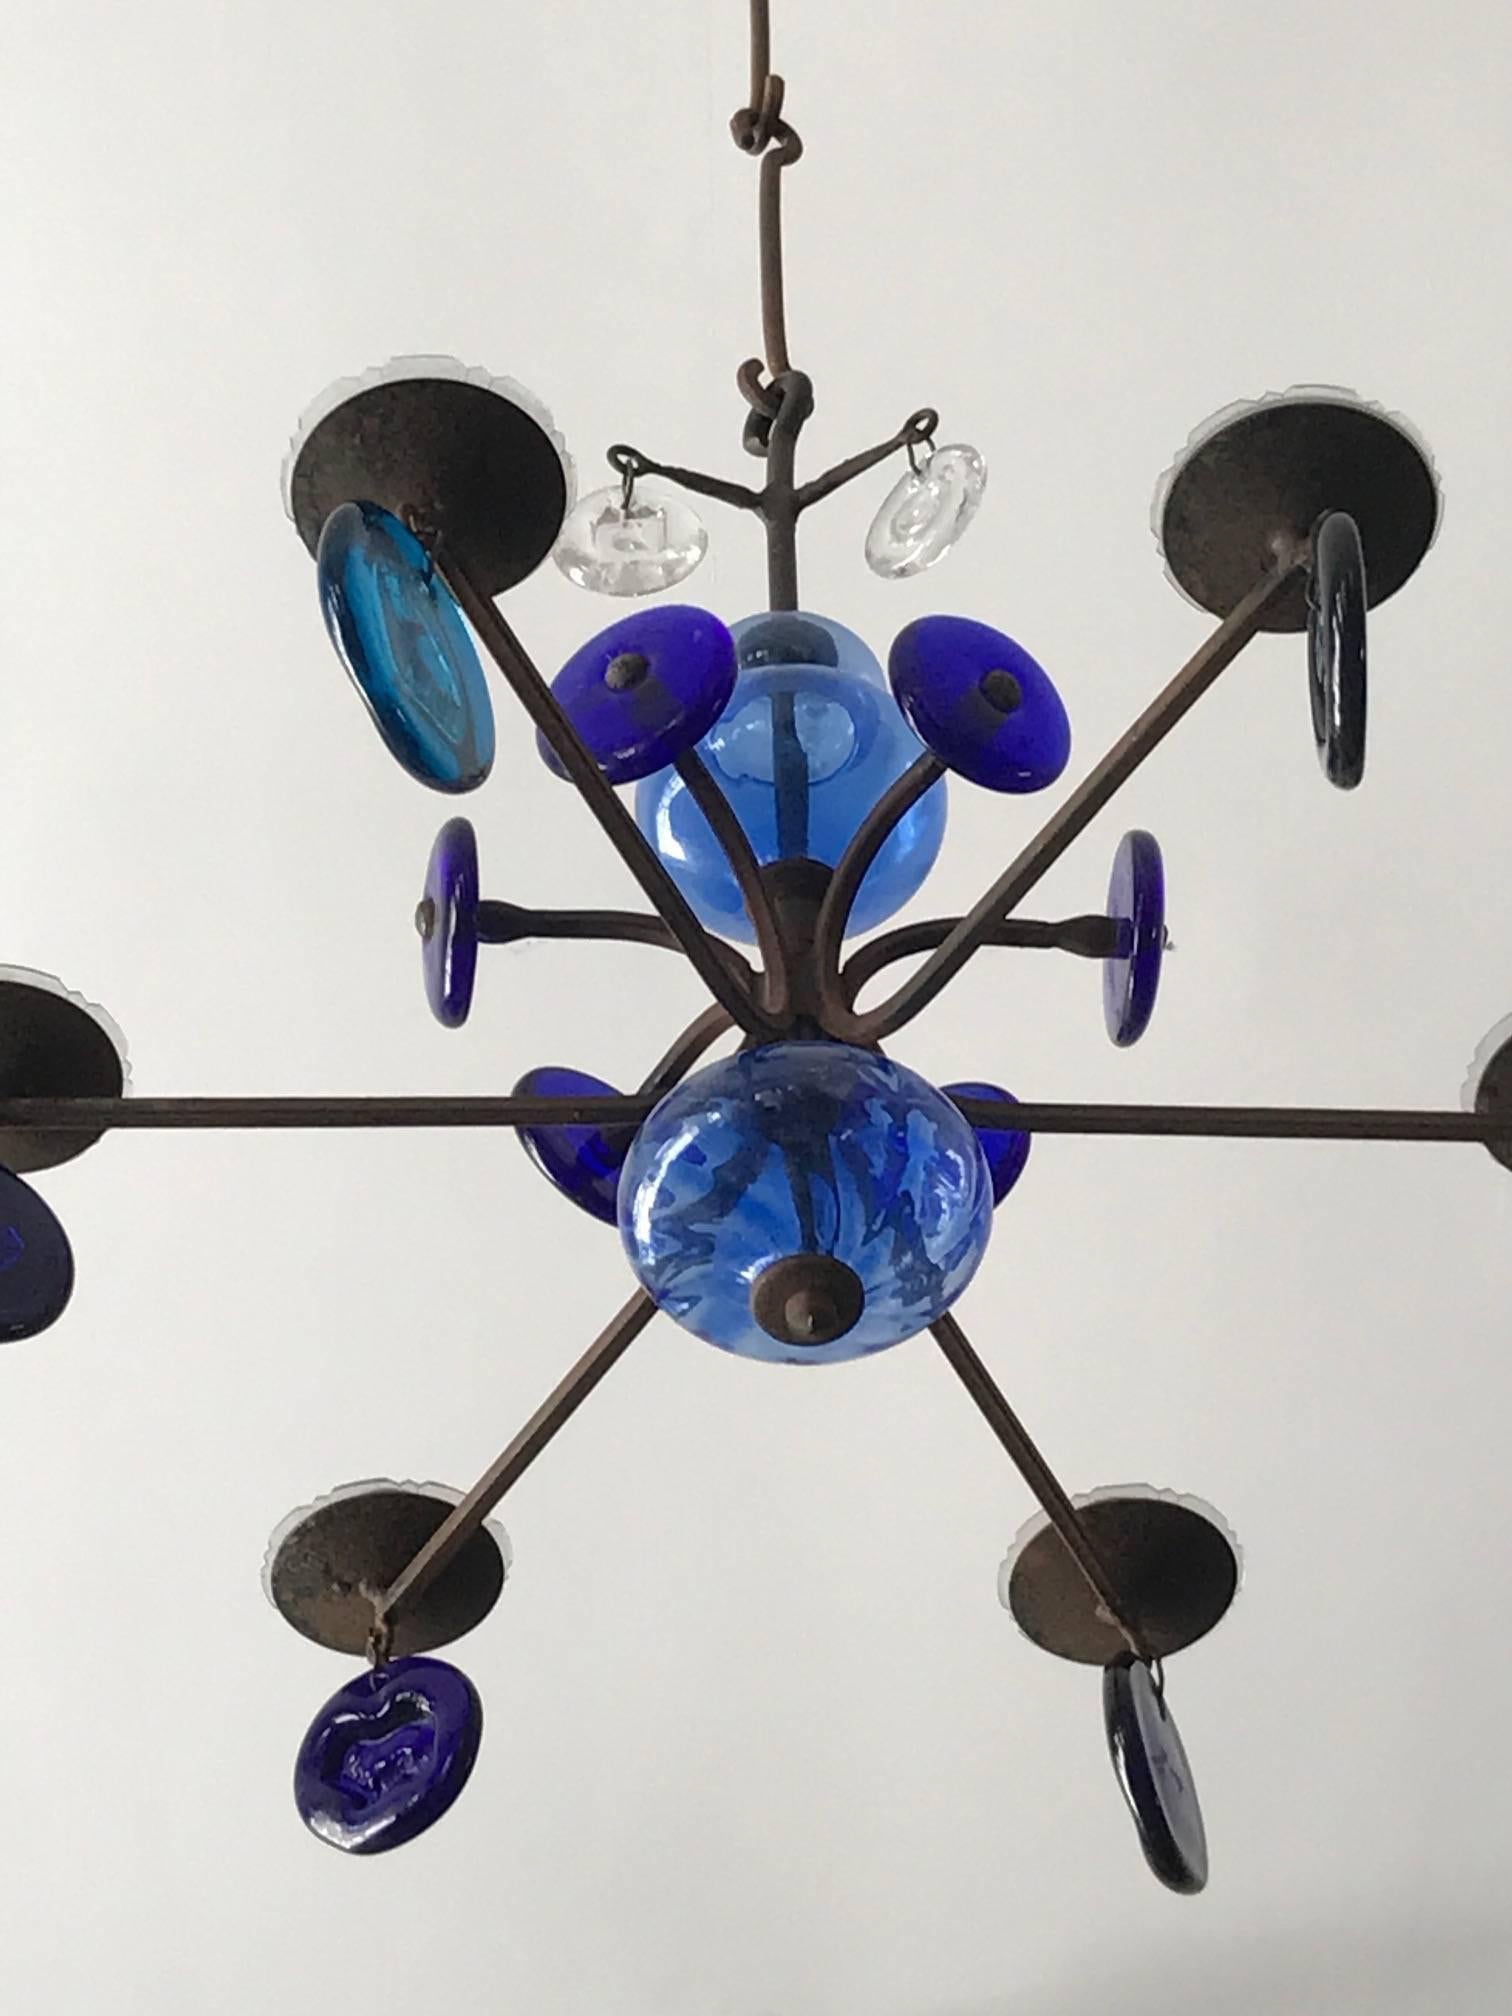 A charming chandelier by Erik Hoglund for Kosta Boda. Glass and wrought iron.